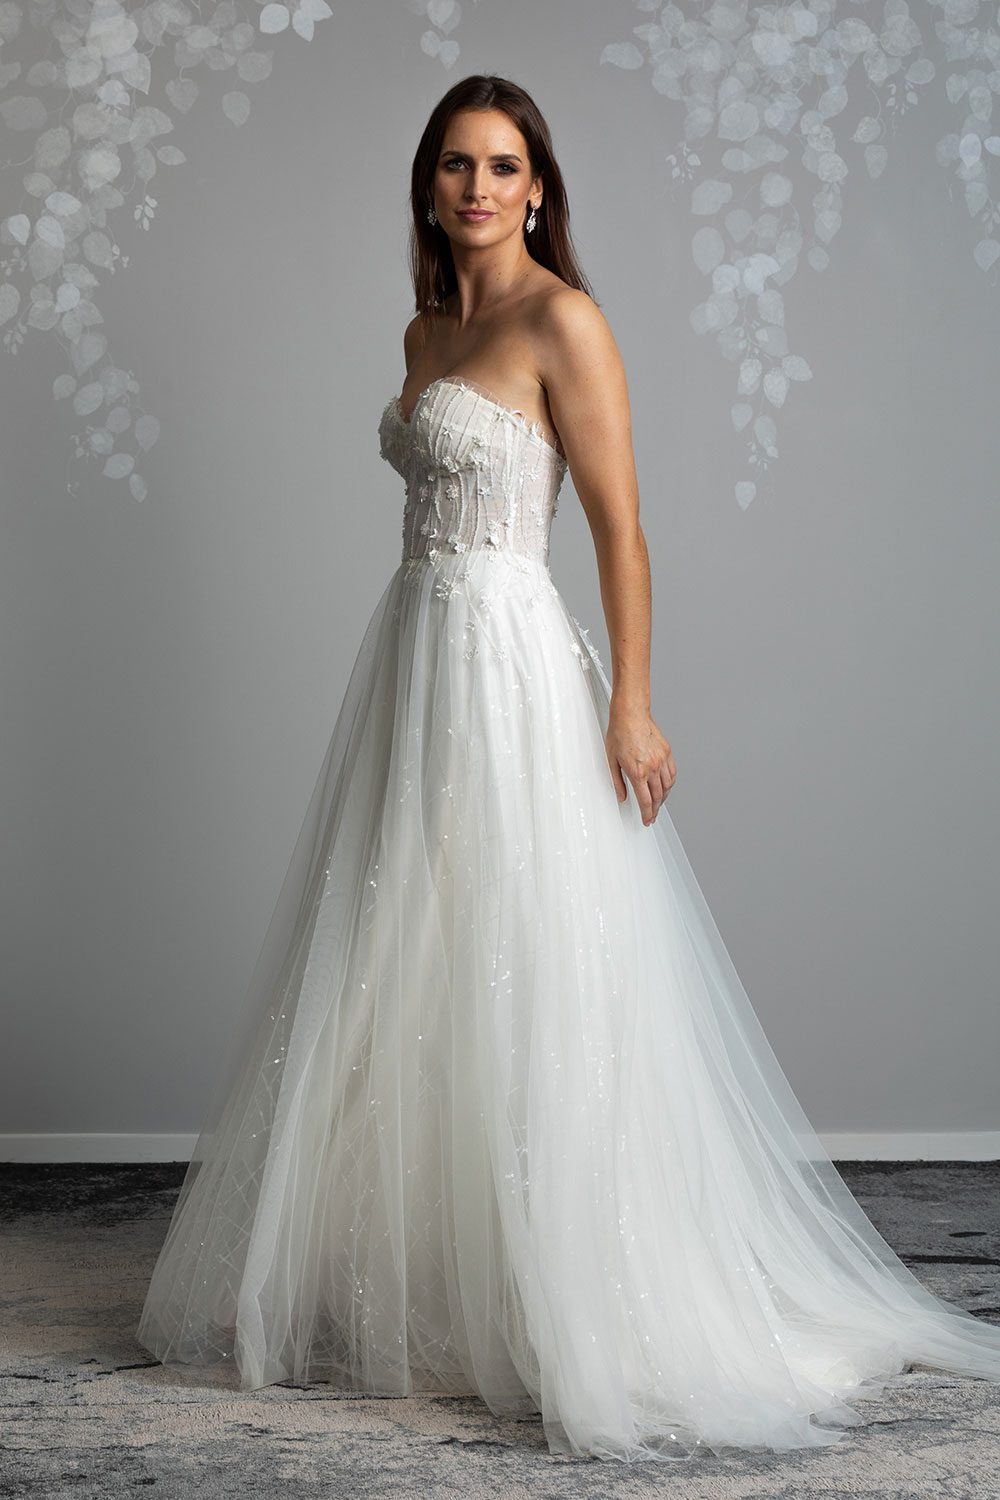 Hikari Wedding gown from Vinka Design - This modern wedding dress has a structured semi-sheer bodice with hand-appliqued lace of stars and flowers. The skirt is made with multiple layers of soft tulle. Profile view of model wearing stunning contemporary gown with feminine appeal